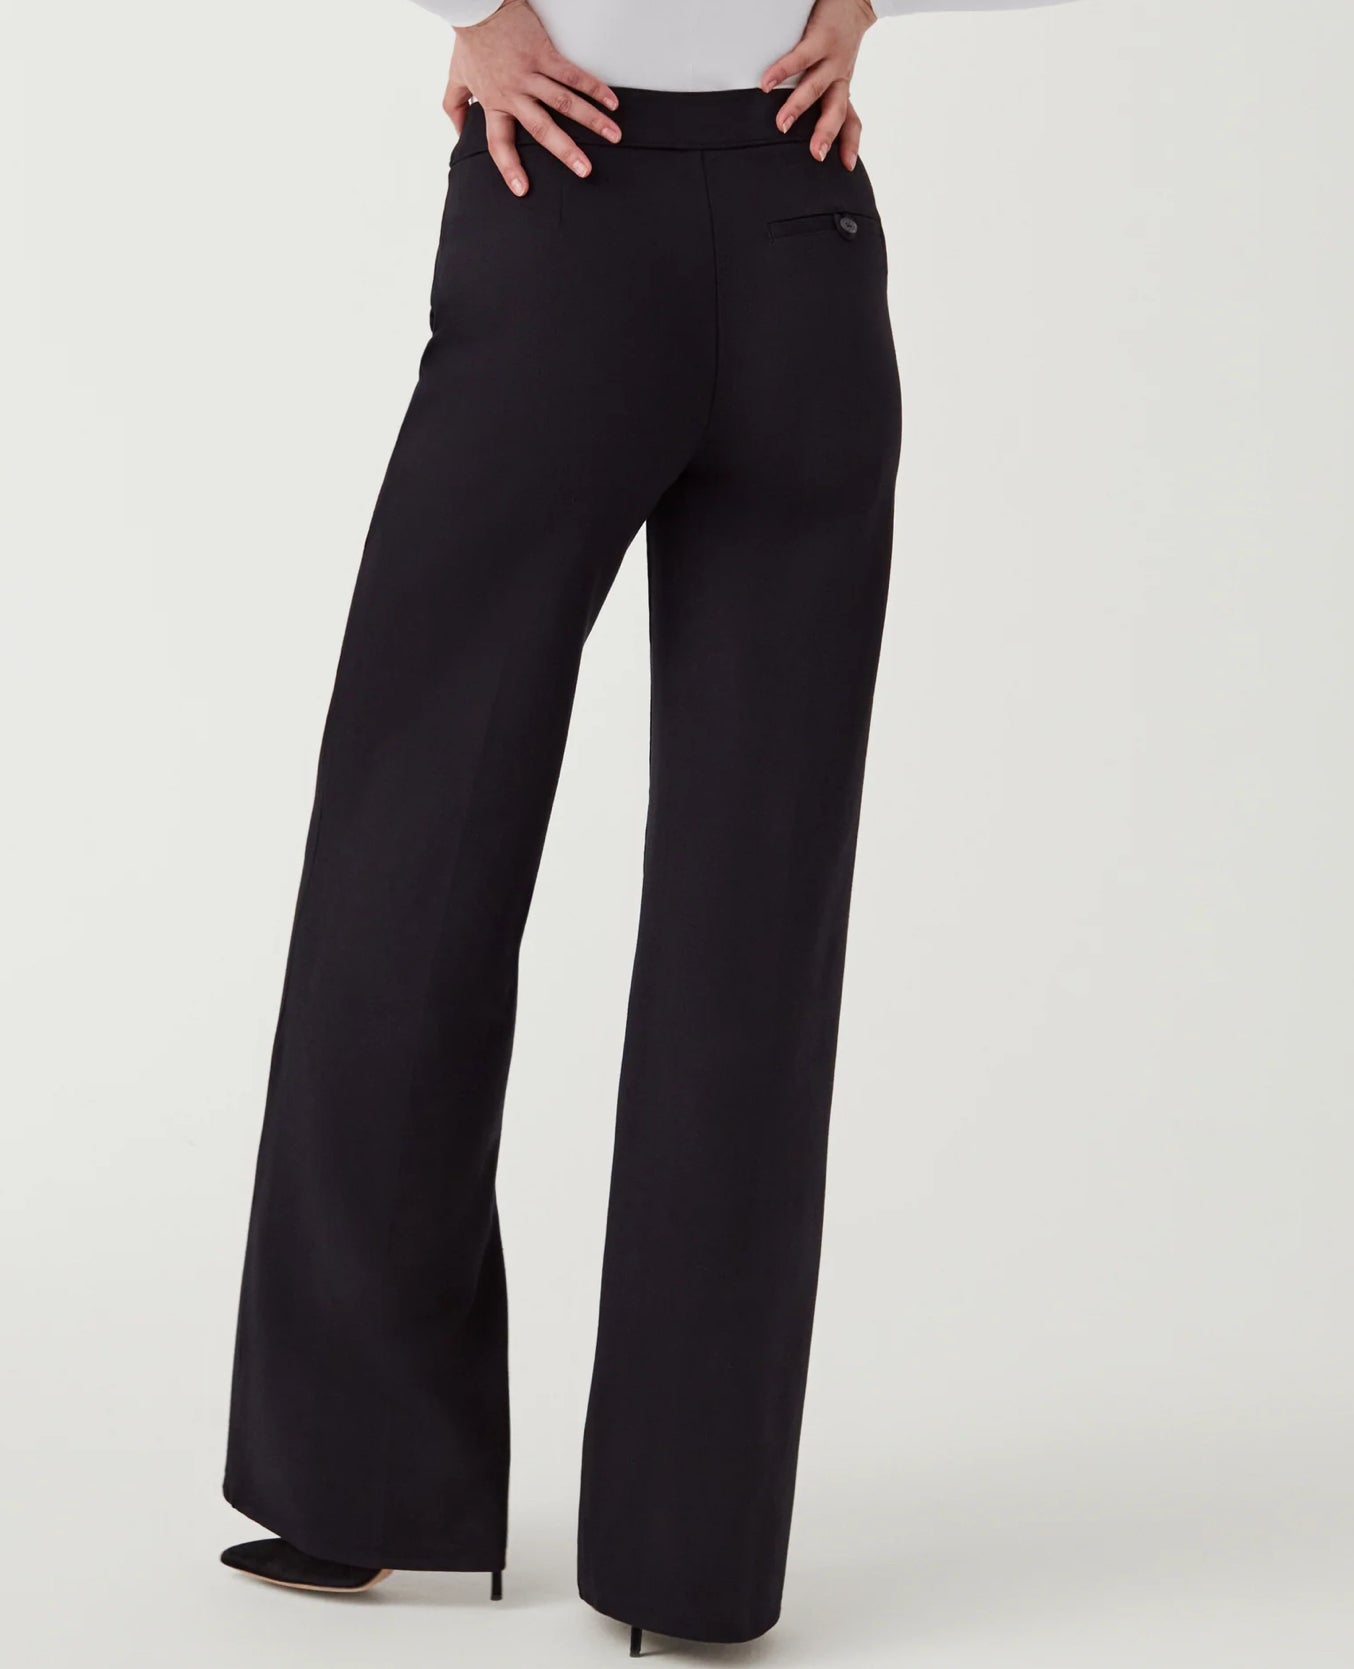 Spanx The Perfect Pant, Kick Flare In Houndstooth Jacquard in